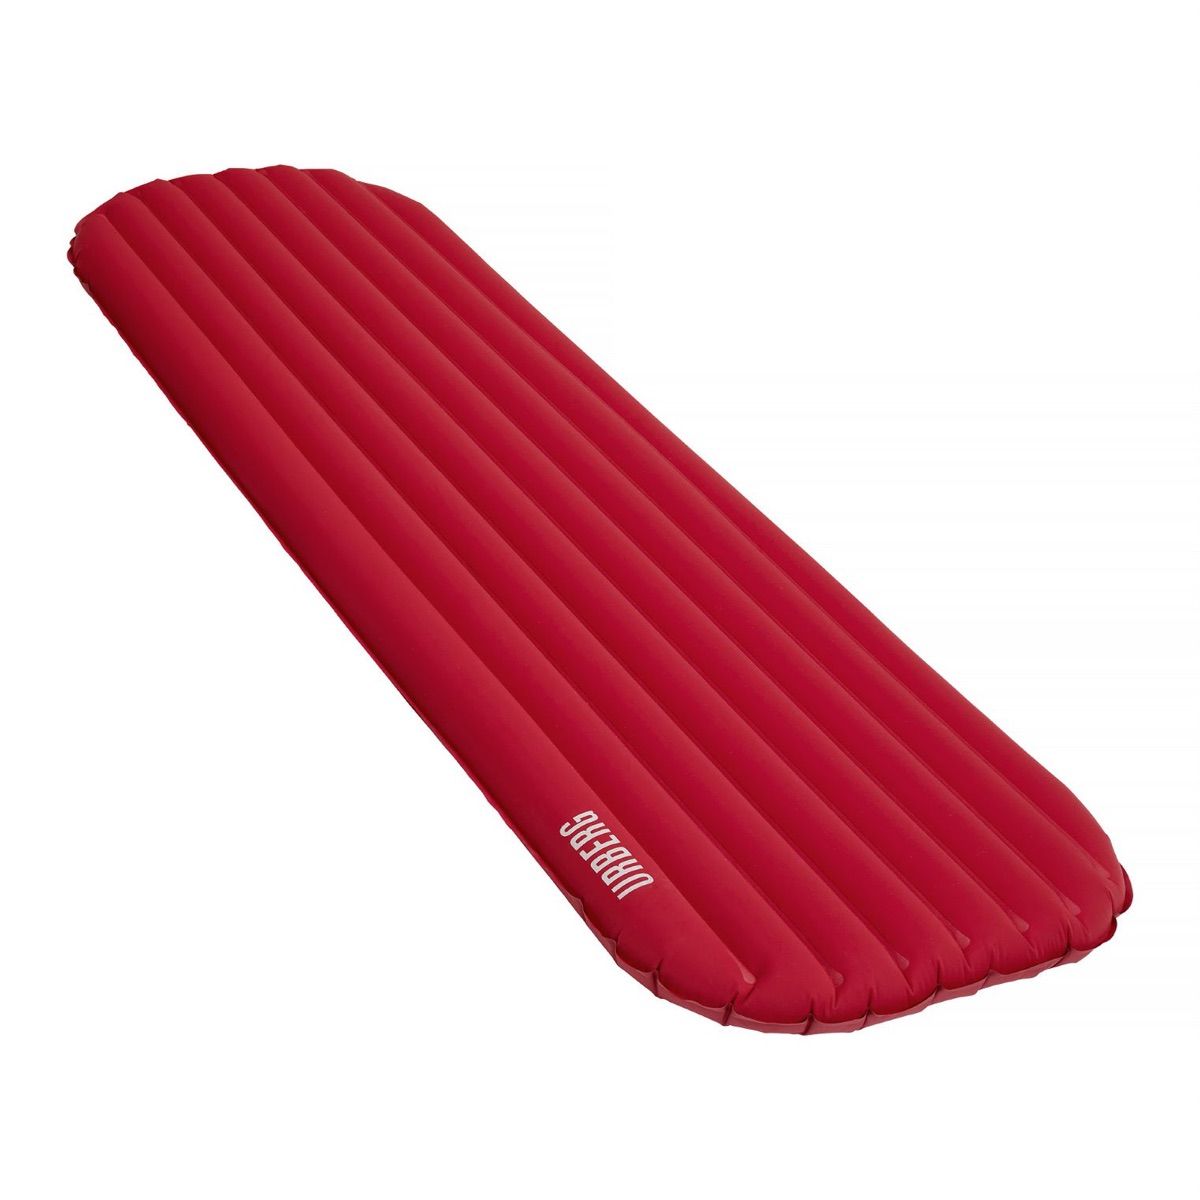 Urberg Insulated Airmat Vertical Channels Rio Red